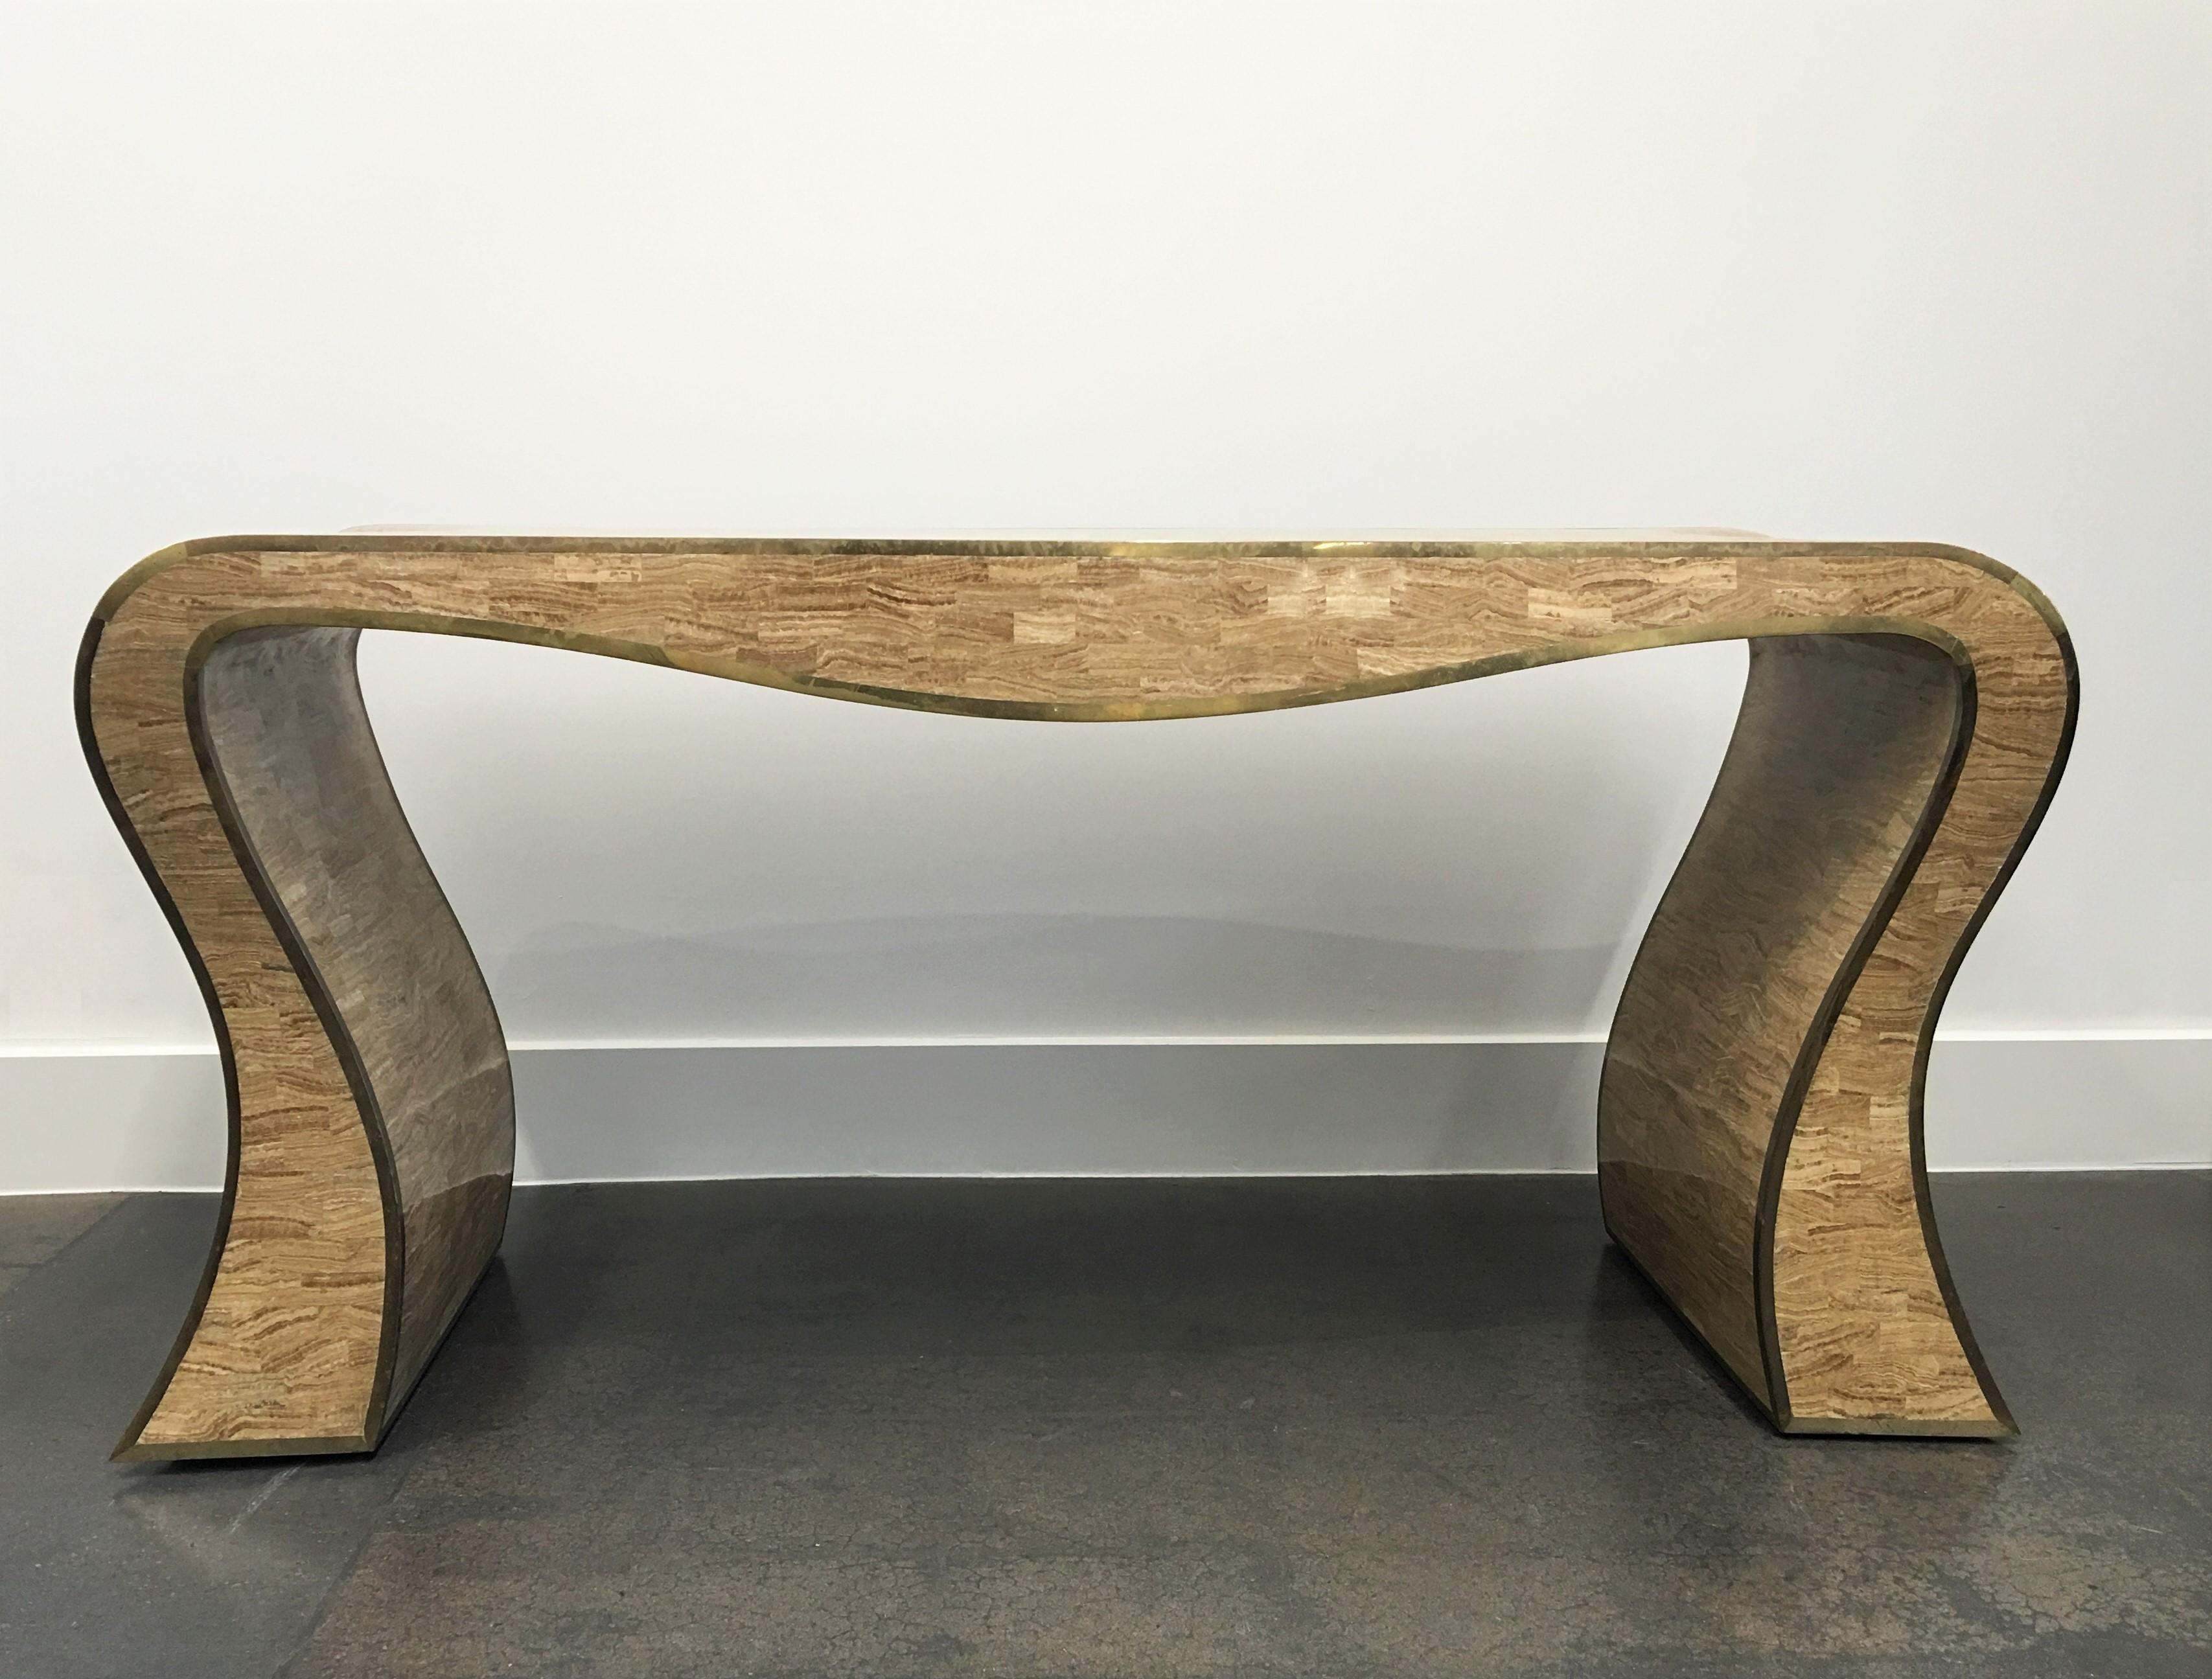 A quite stunning sculptural console table by Maitland-Smith. It is tessellated stone with brass trim in a sinuous form. A very striking table. The brass trimmed is of the finest craftsmanship and has warm patina. Label on the underside.